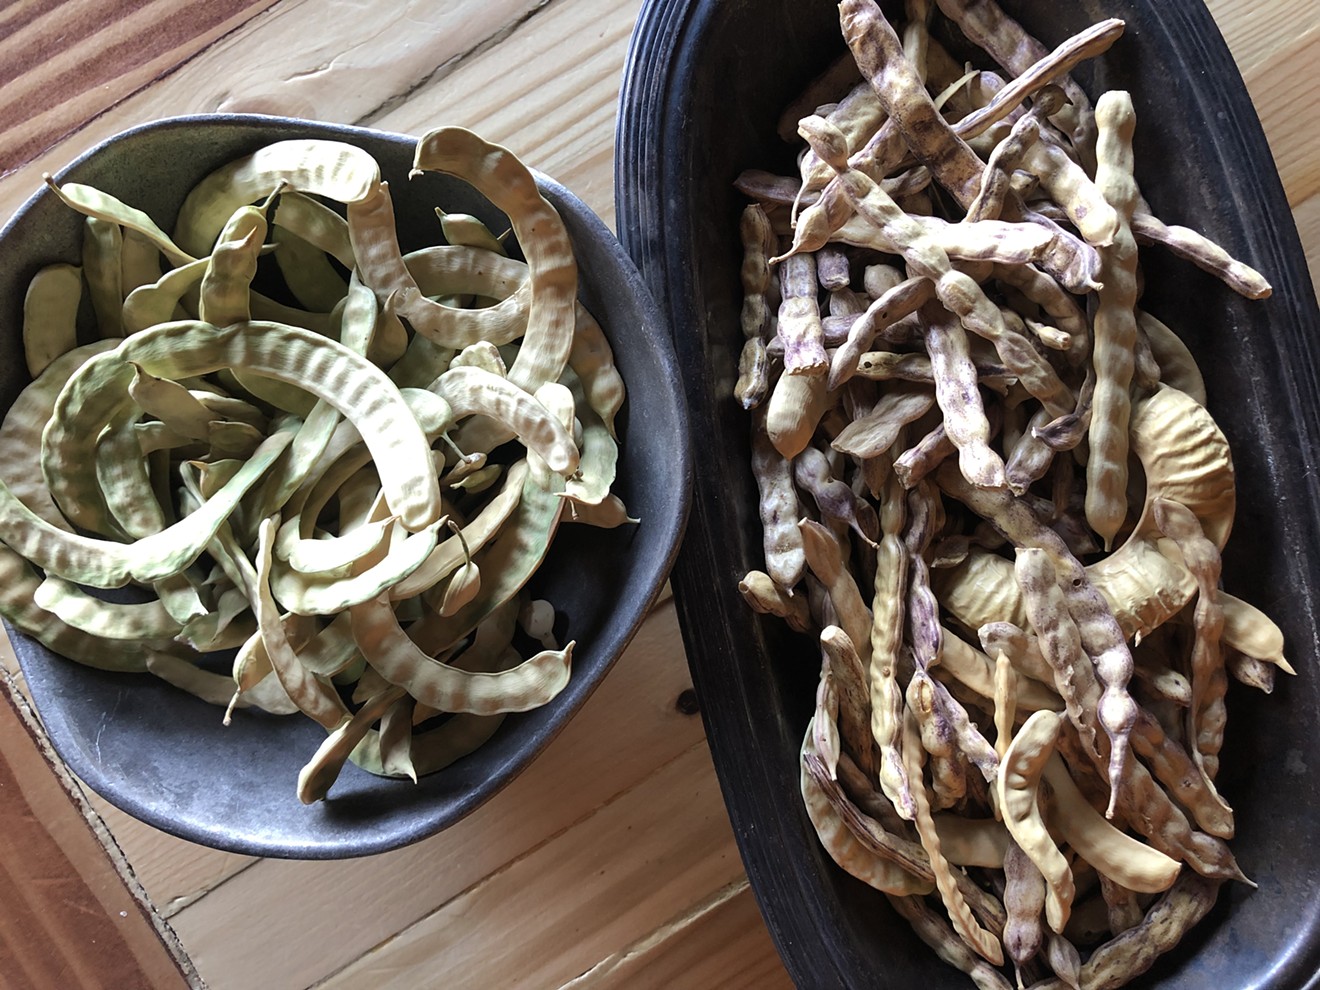 Freshly foraged pre-monsoon pods from two species of mesquite.